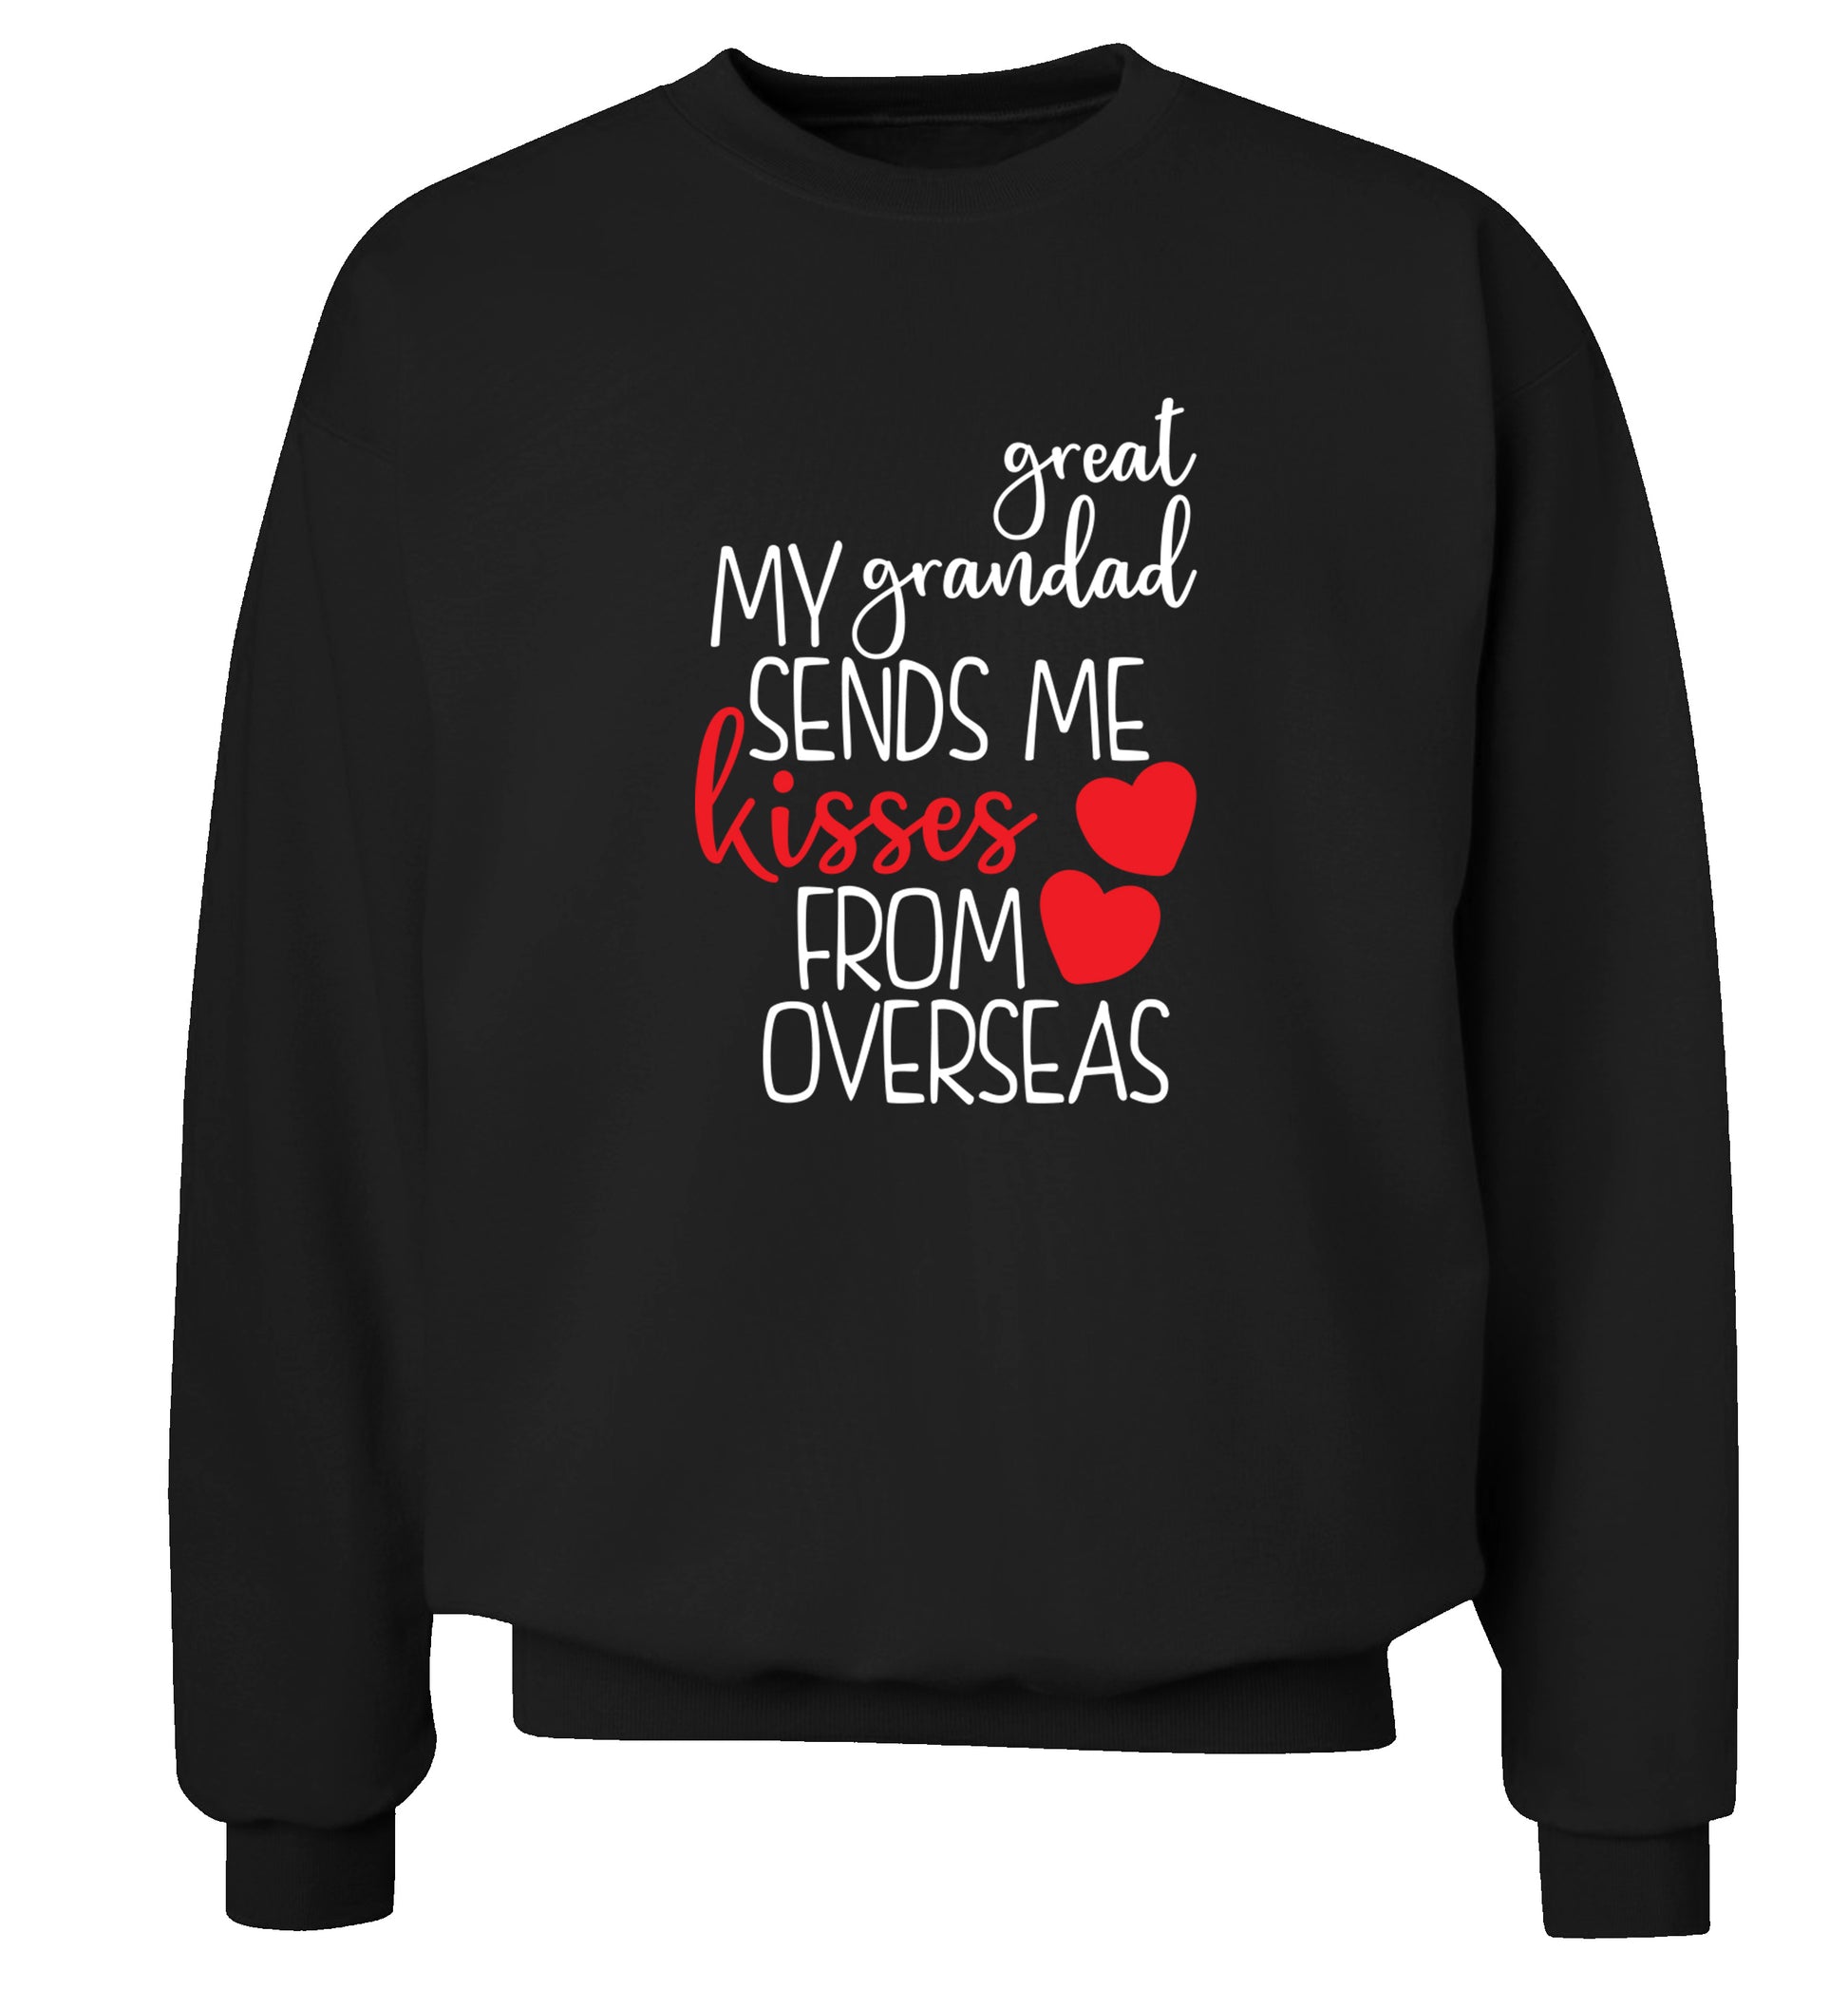 My great grandad sends me kisses from overseas Adult's unisex black Sweater 2XL